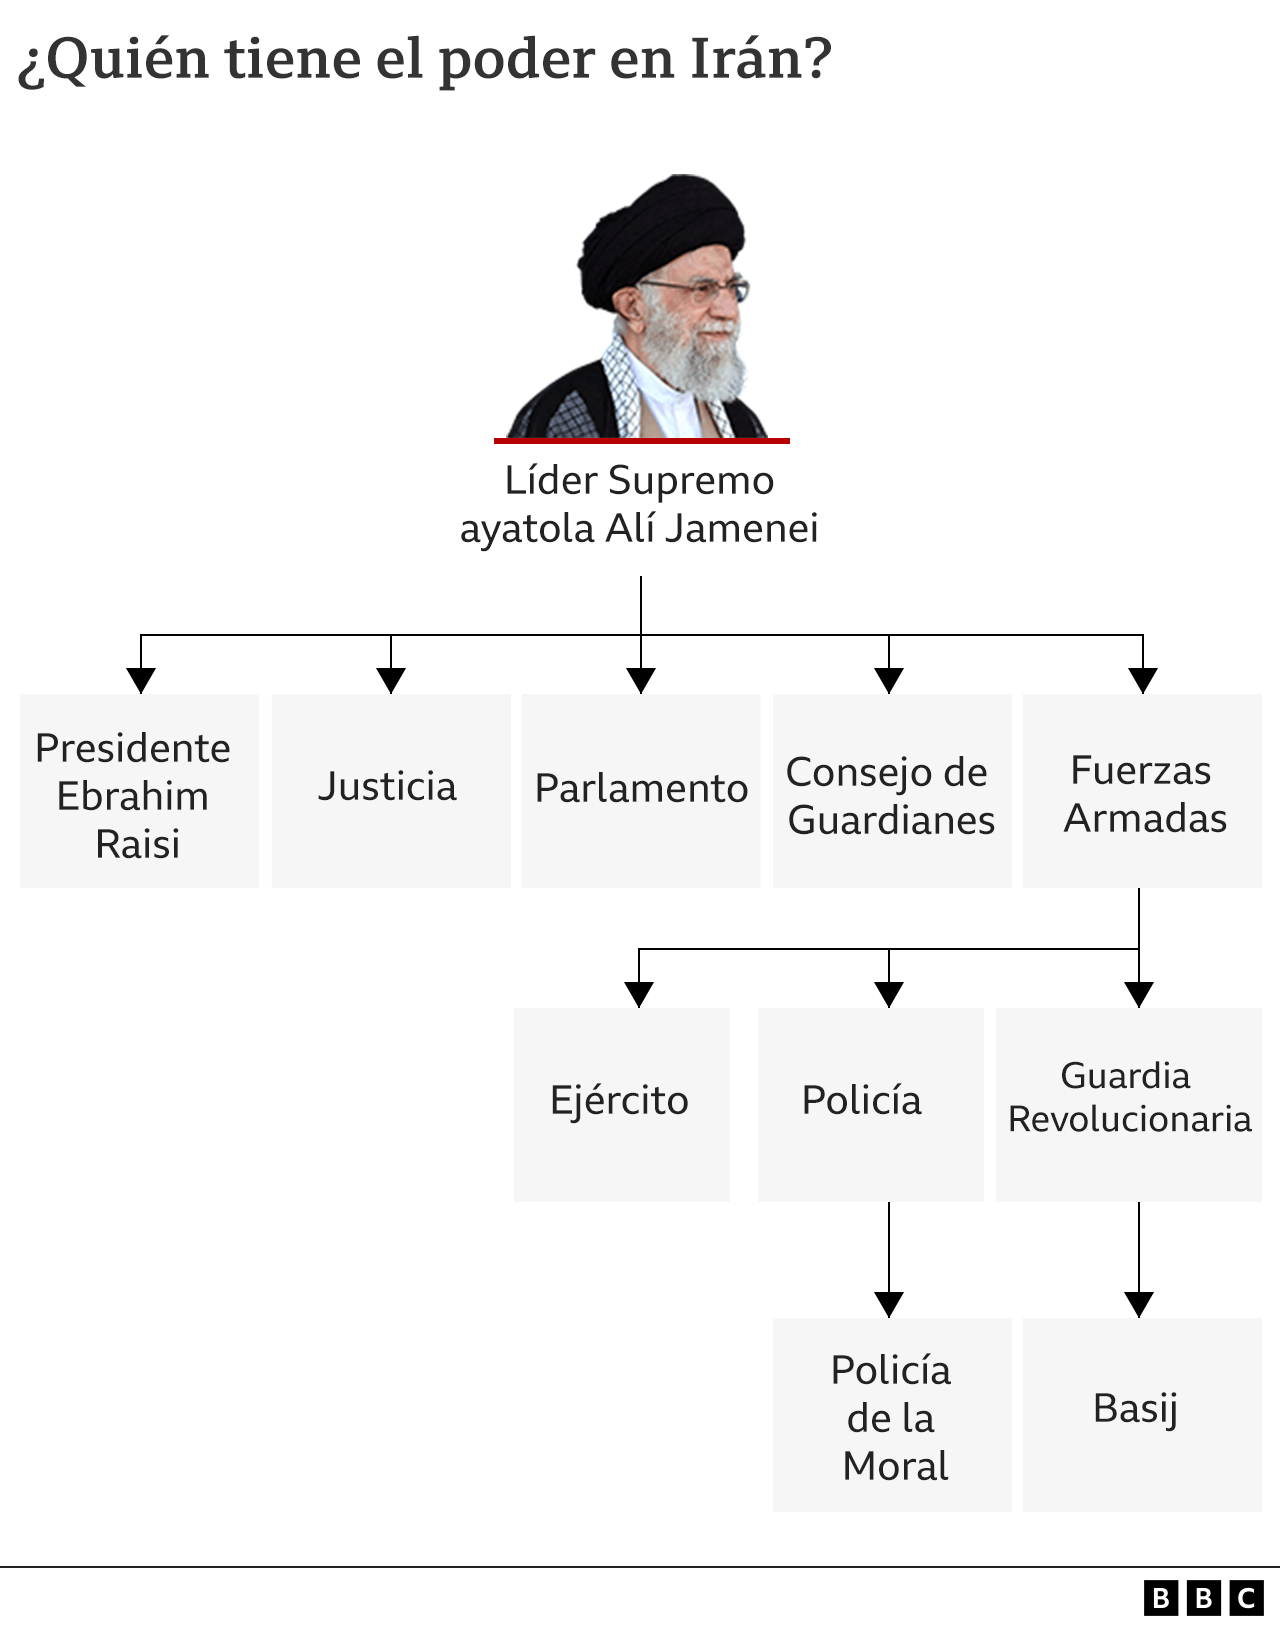 Power structure in Iran